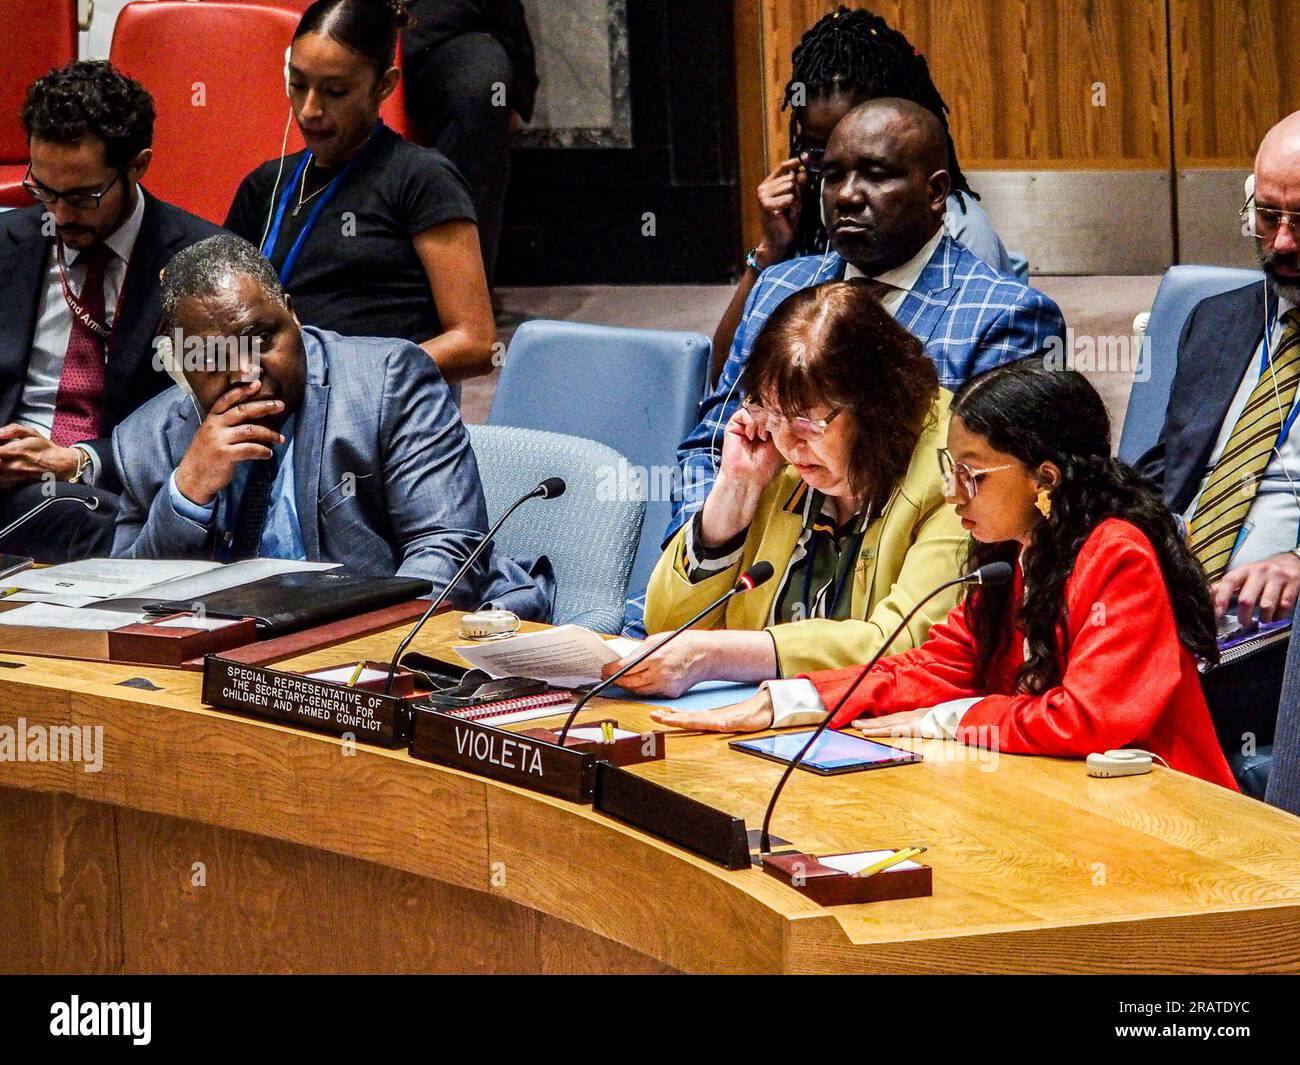 New York, New York, USA. 5th July, 2023. VIOLETA RAMIREZ-GUARIN, a Columbian social psychologist speaks to the Security Council in the UN with VIRGINIA GAMBA, Special Representative of the Secretary-General for Children and Armed Conflict sitting next to her. The meeting took place to express 2022 Annual Report of the Secretary-General on Children and Armed Conflict which is a compiled version of grave violations enforced on children in conflict zones. Within the report is an estimated 27,180 grave violations to children occurred in 2022 within in specifically conflict and war zone a Stock Photo